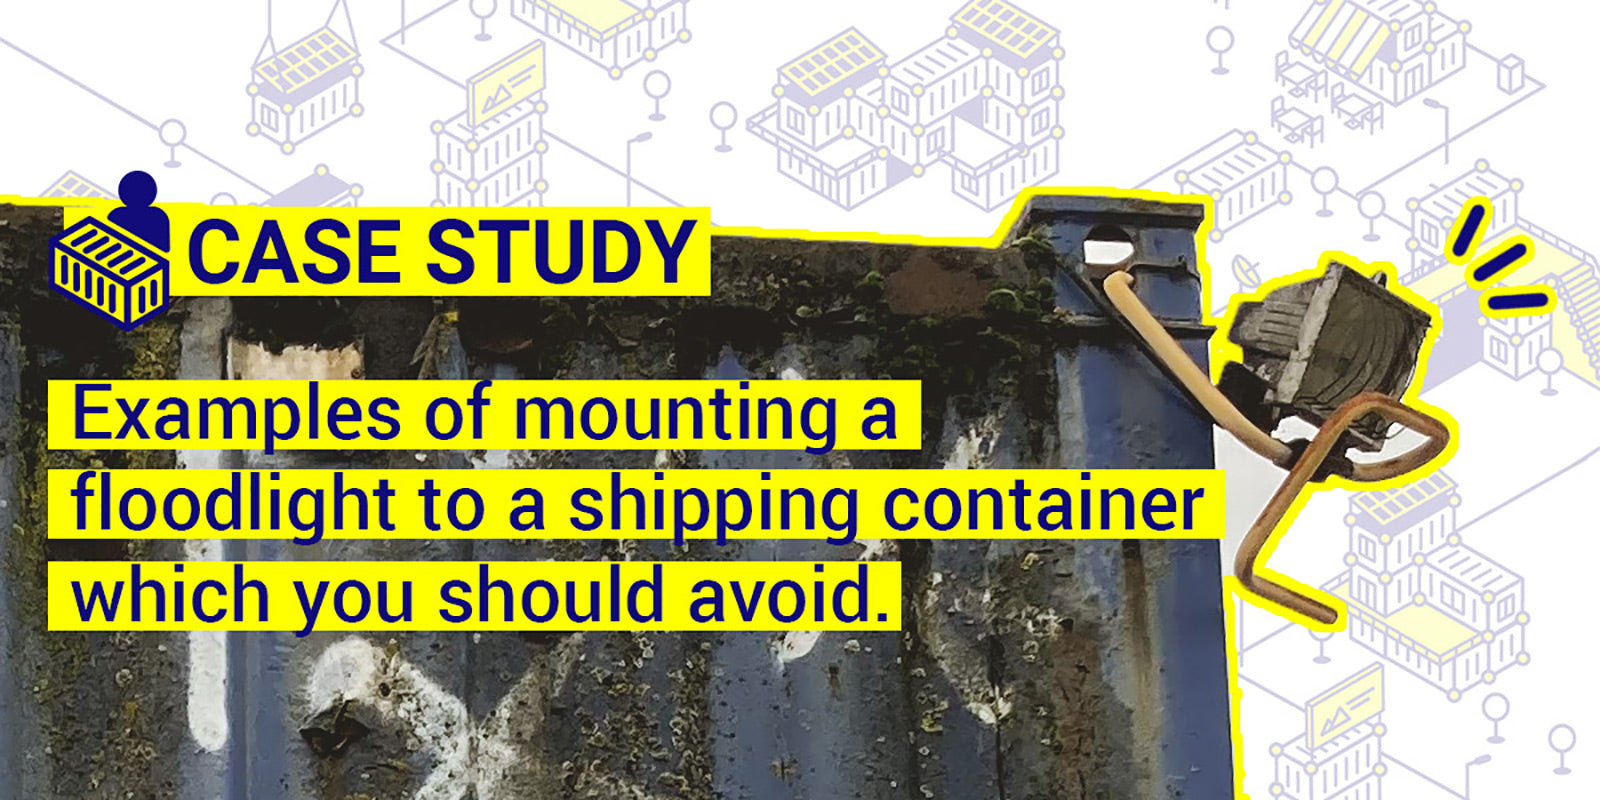 Example of mounting a floodlight to a shipping container which you should avoid